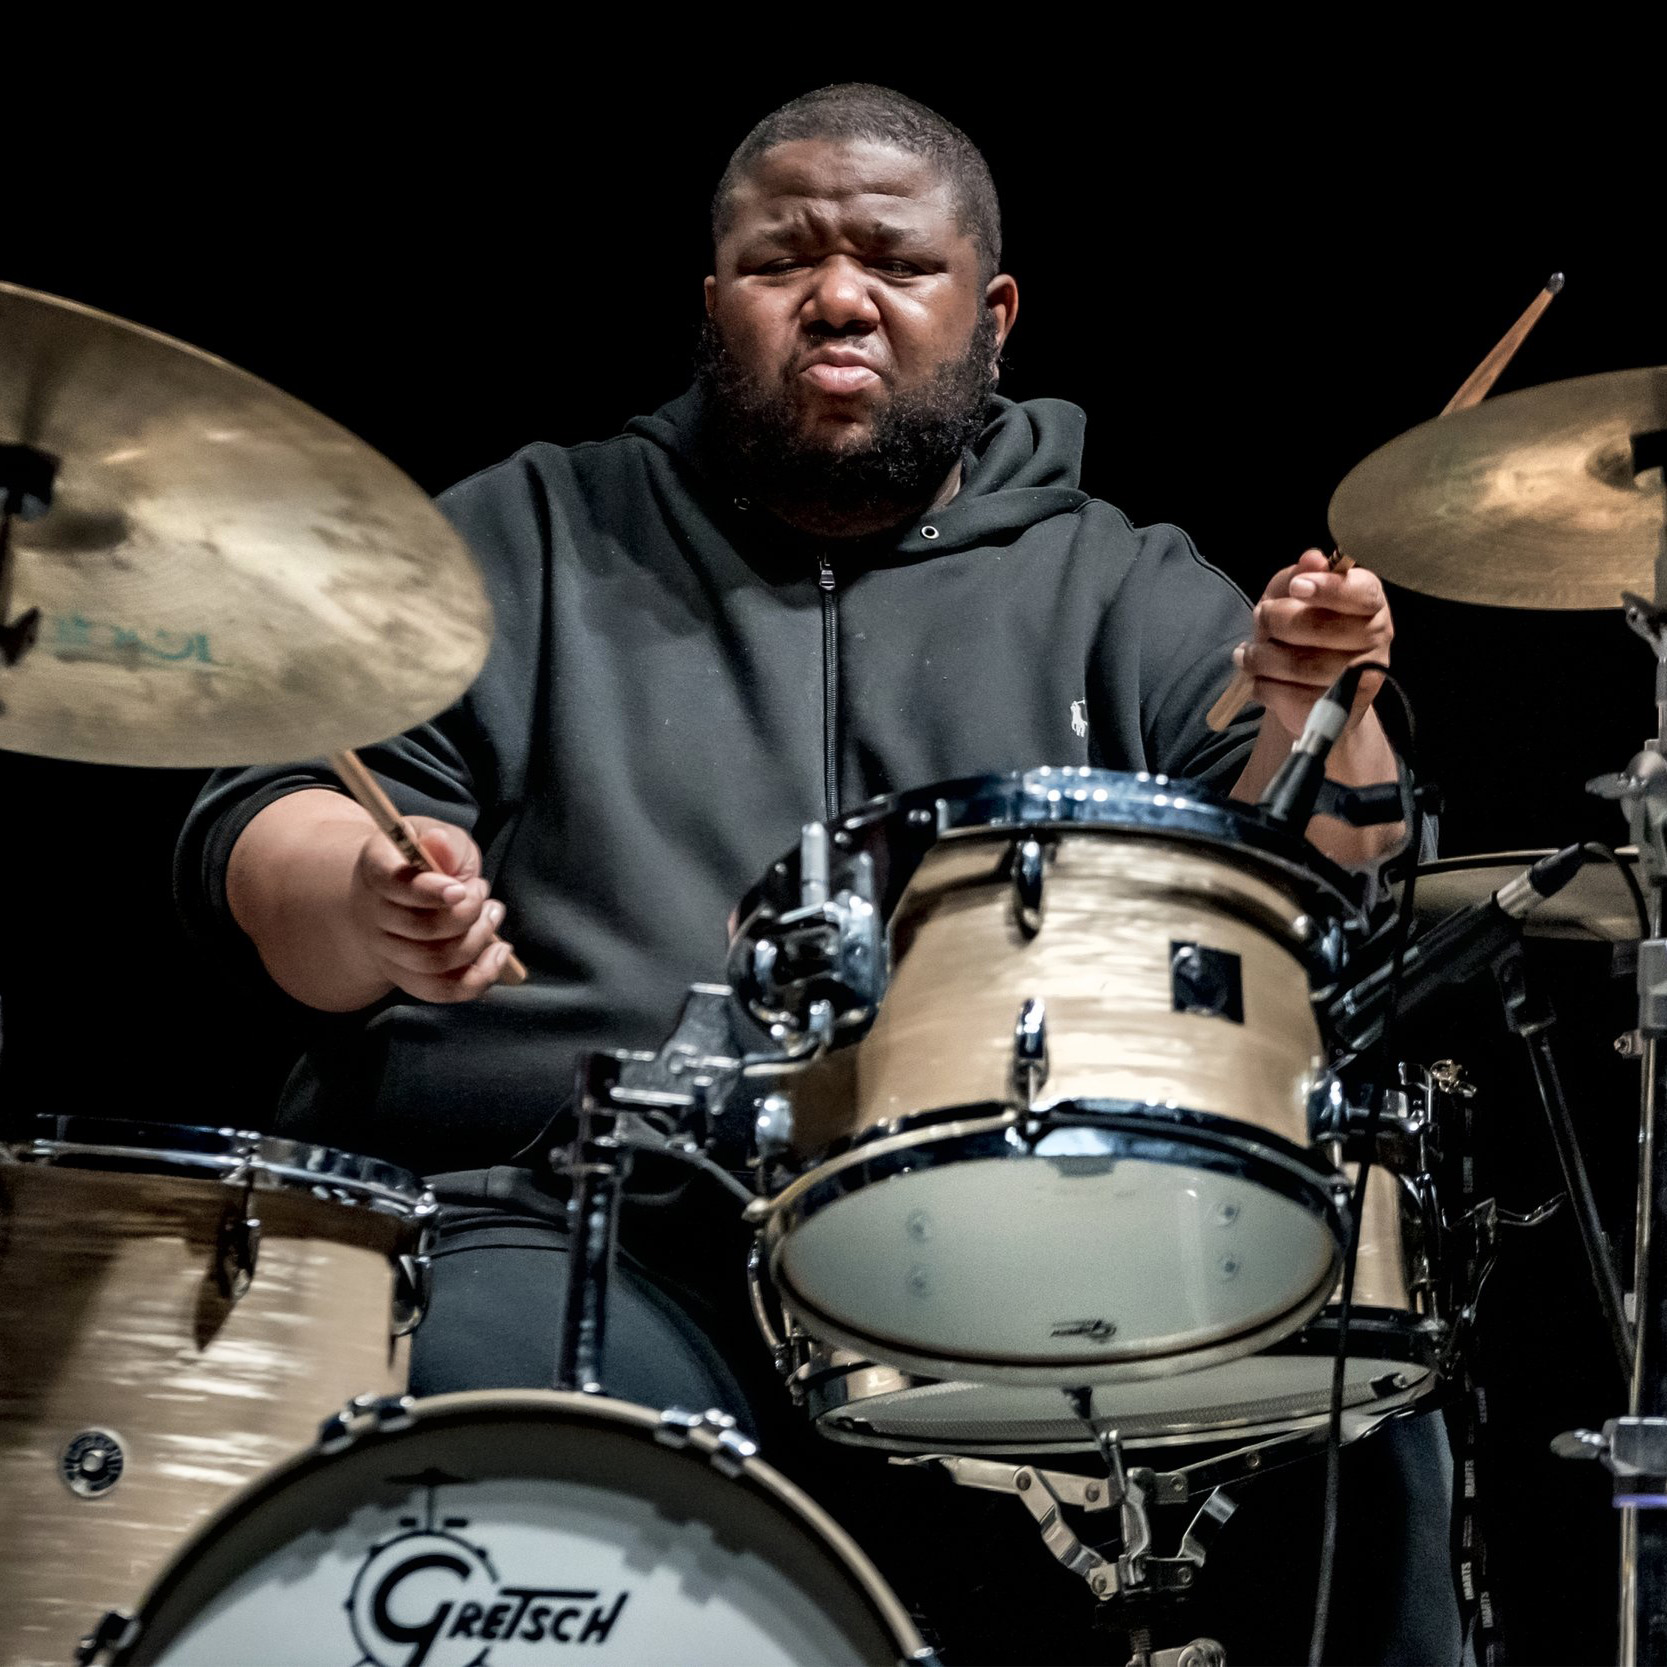 A black man sits at a drumset with a focused look on his face as he plays the drums